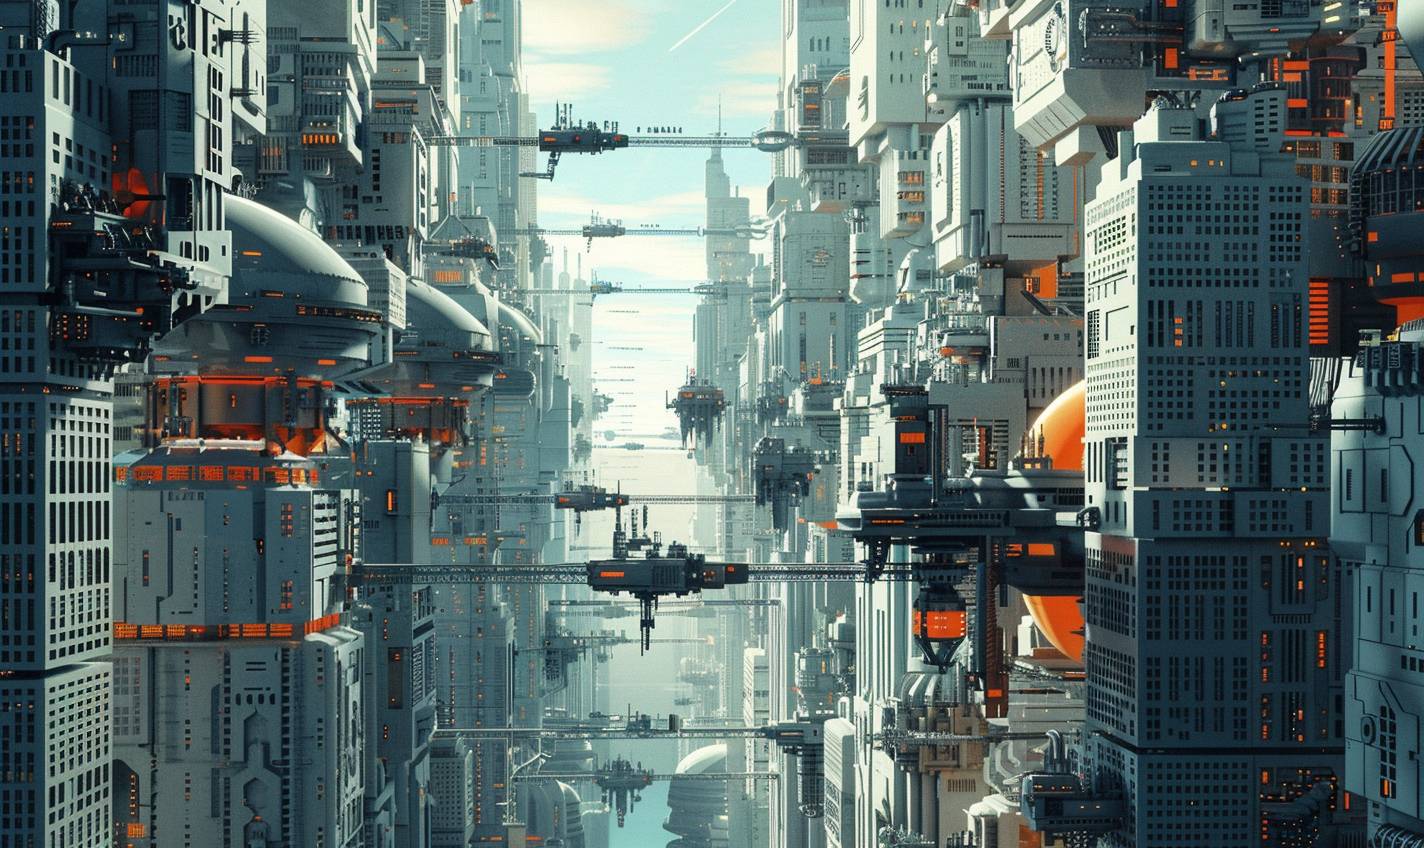 In the style of El Lissitzky, a cybernetic cityscape teeming with artificial life